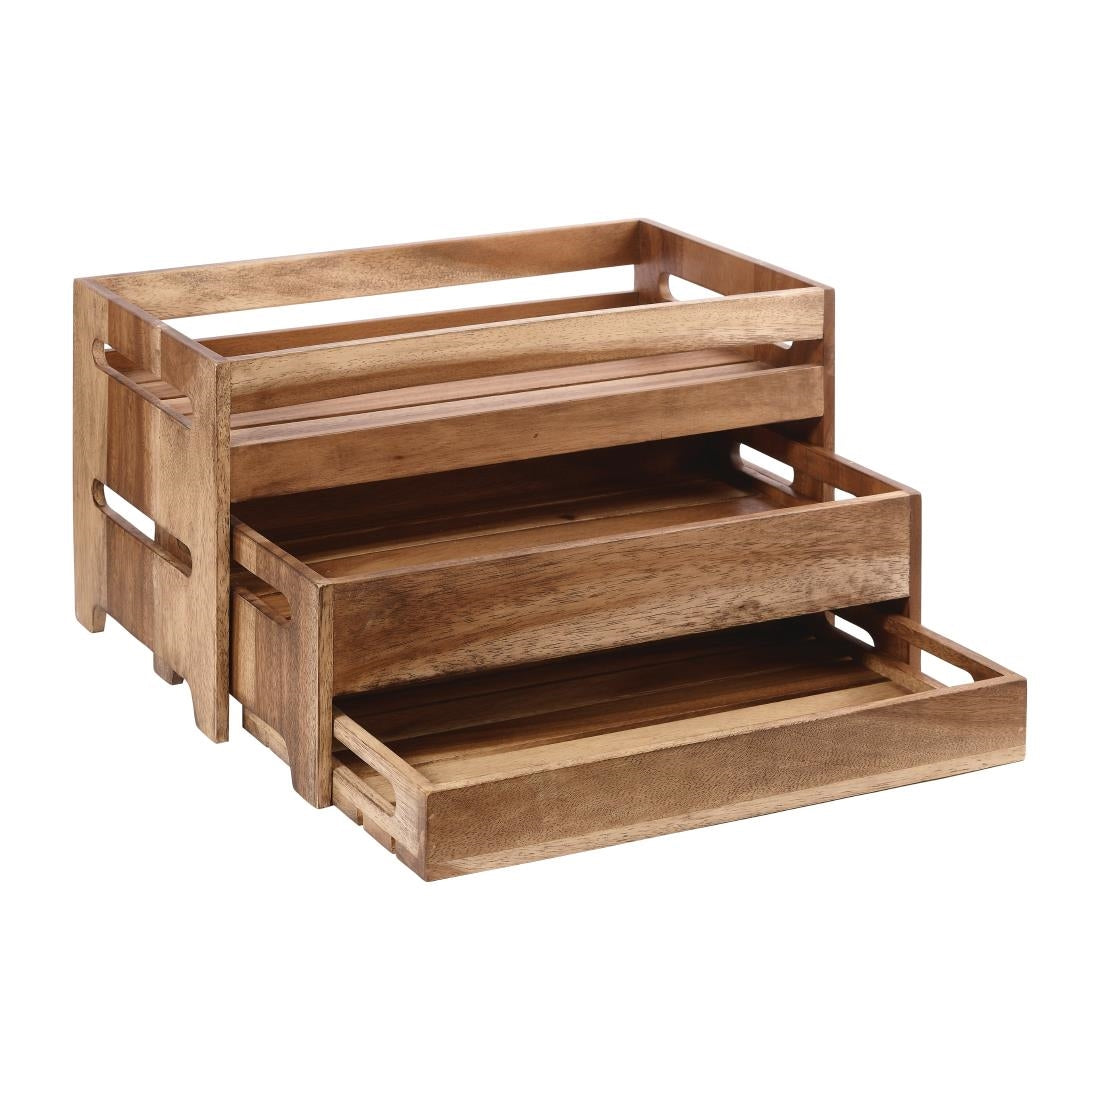 CY740 Churchill Wood Small Rustic Nesting Crate JD Catering Equipment Solutions Ltd